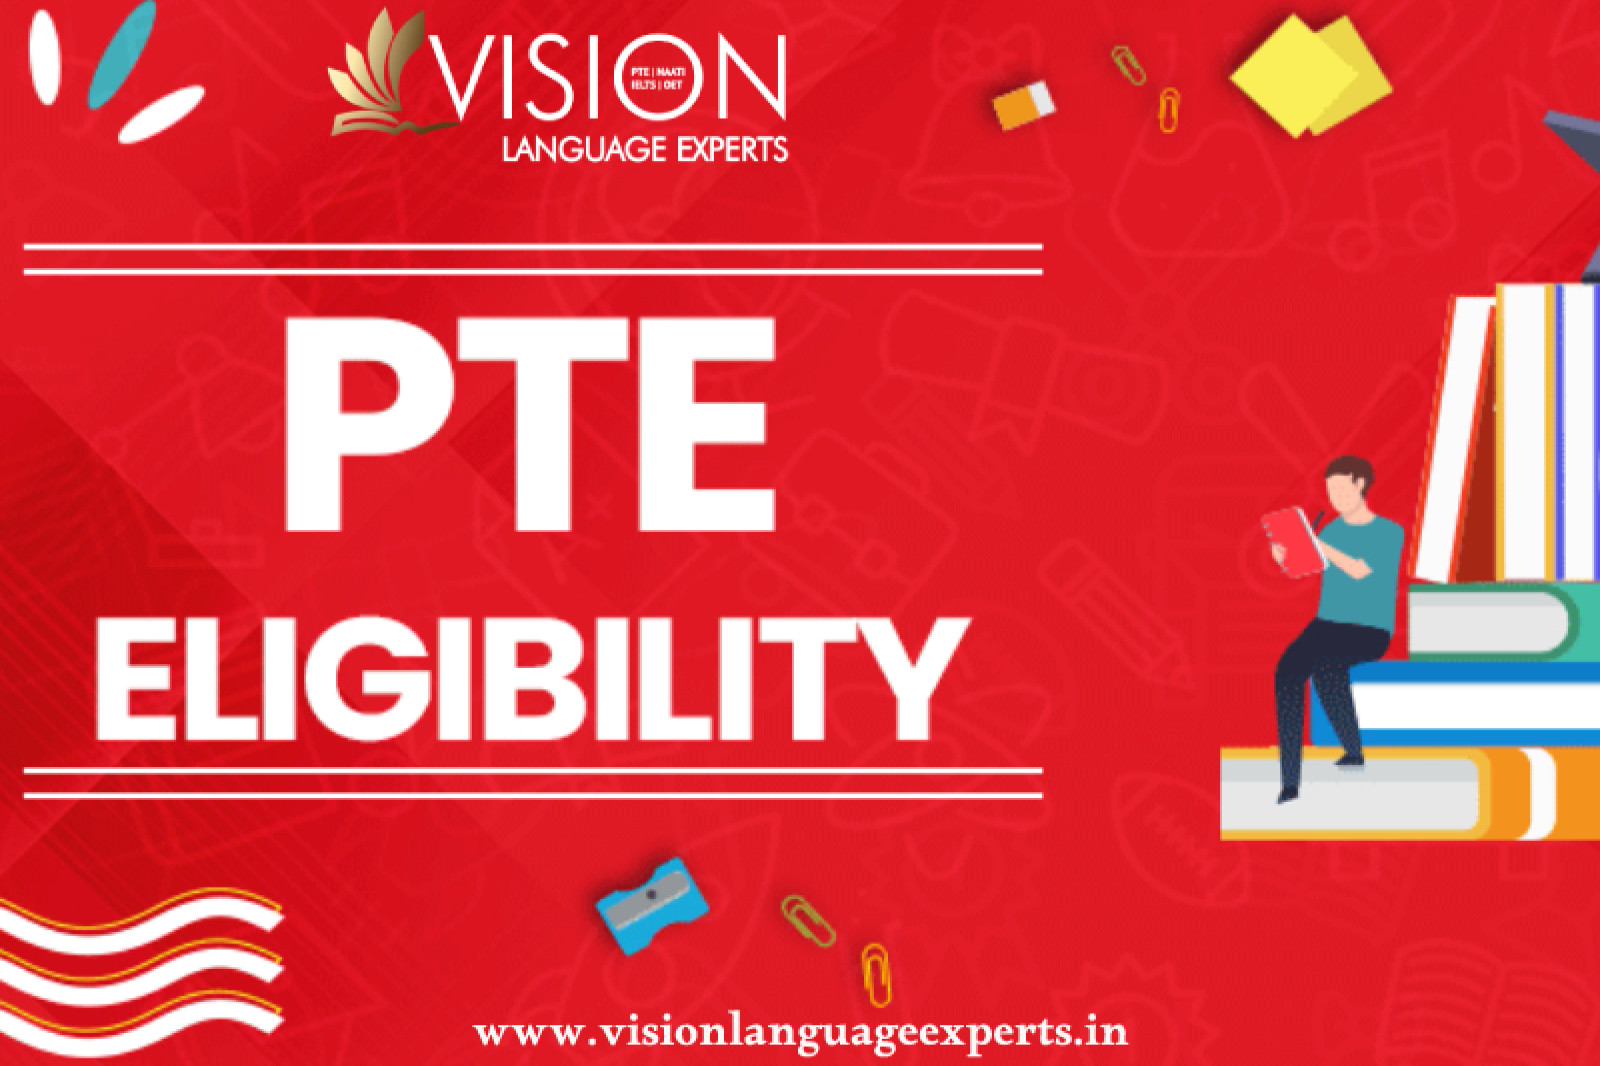 What is PTE eligibility?